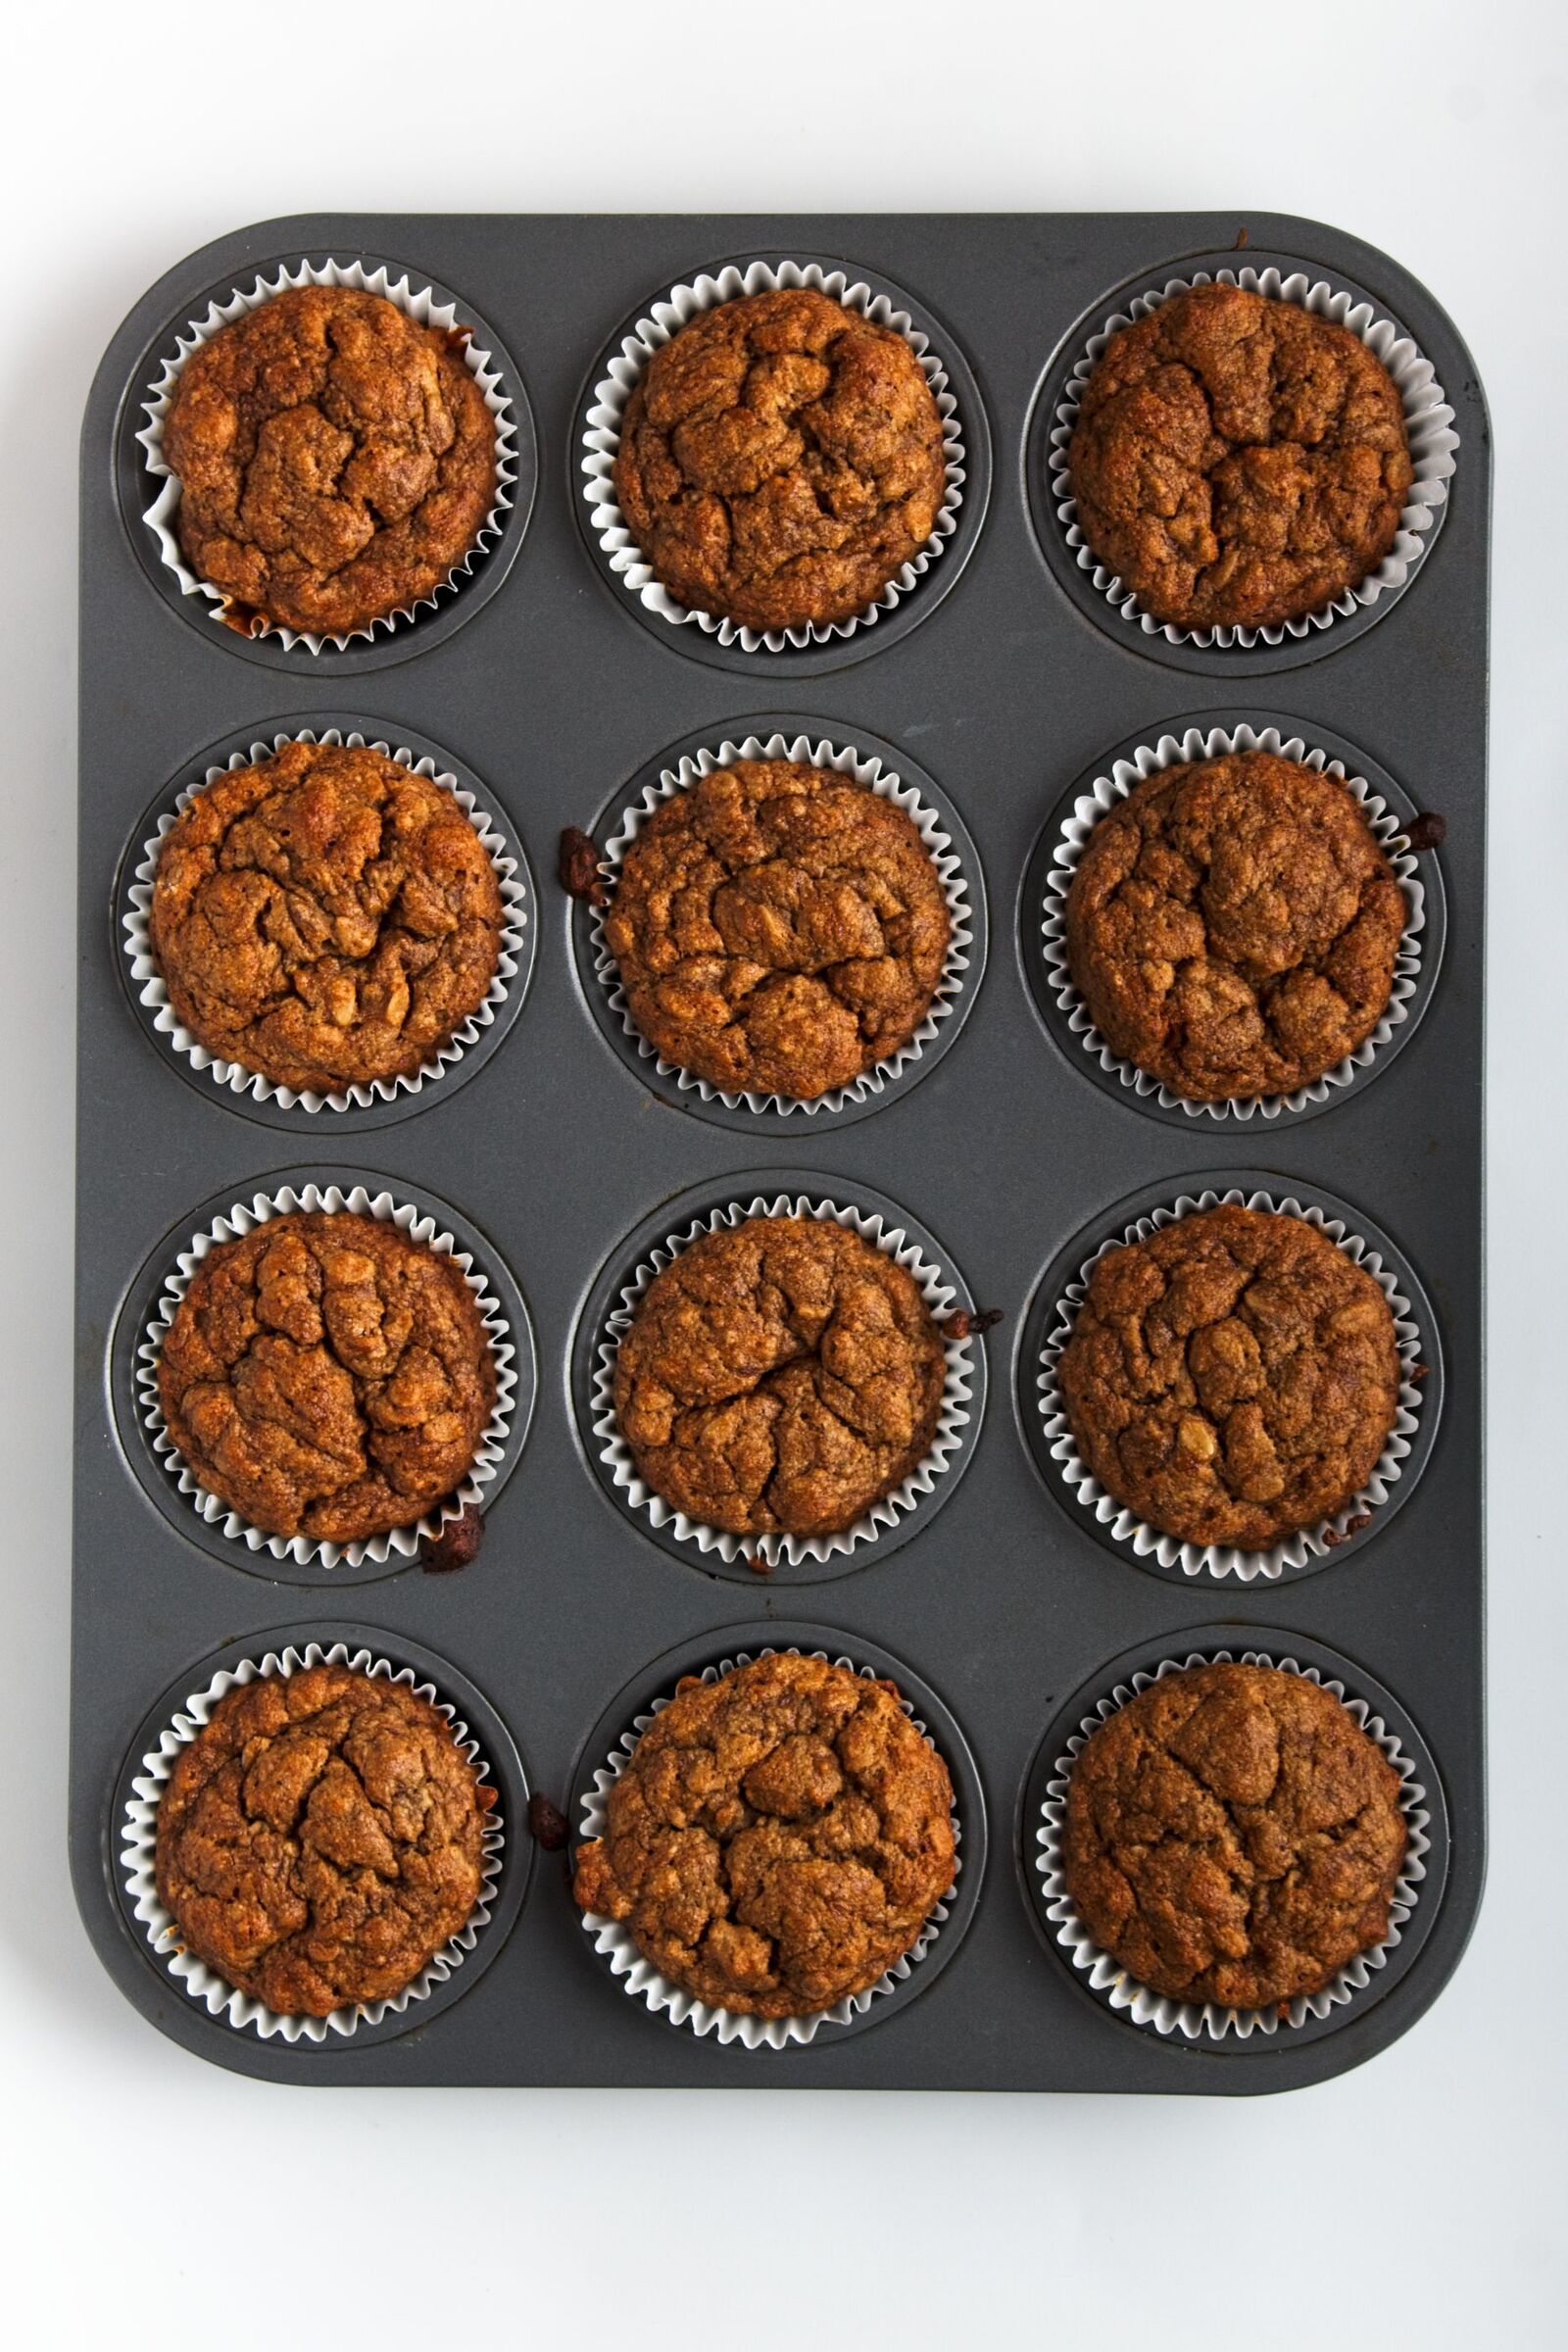 Baked Oat Flour Banana Muffins in a muffin pan.